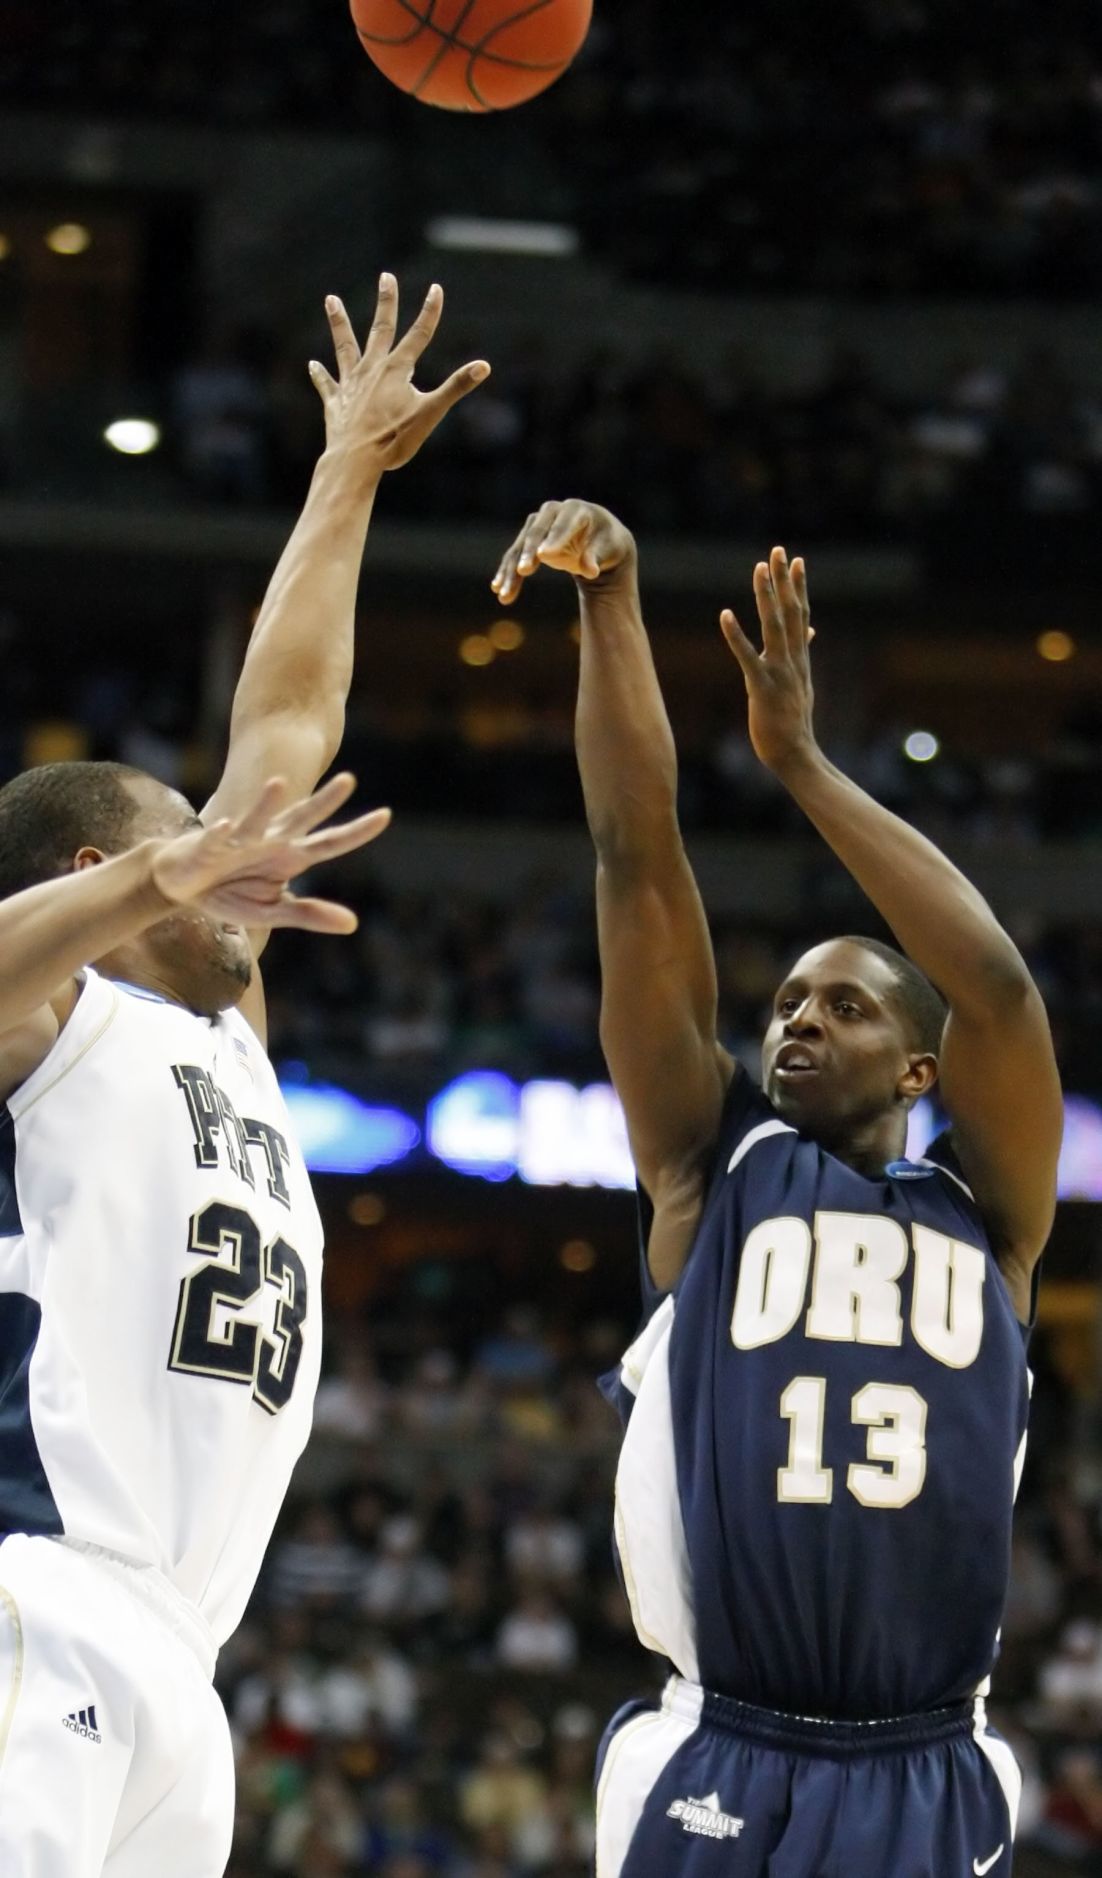 ORU basketball NCAA appearances with Golden Eagles jump started non